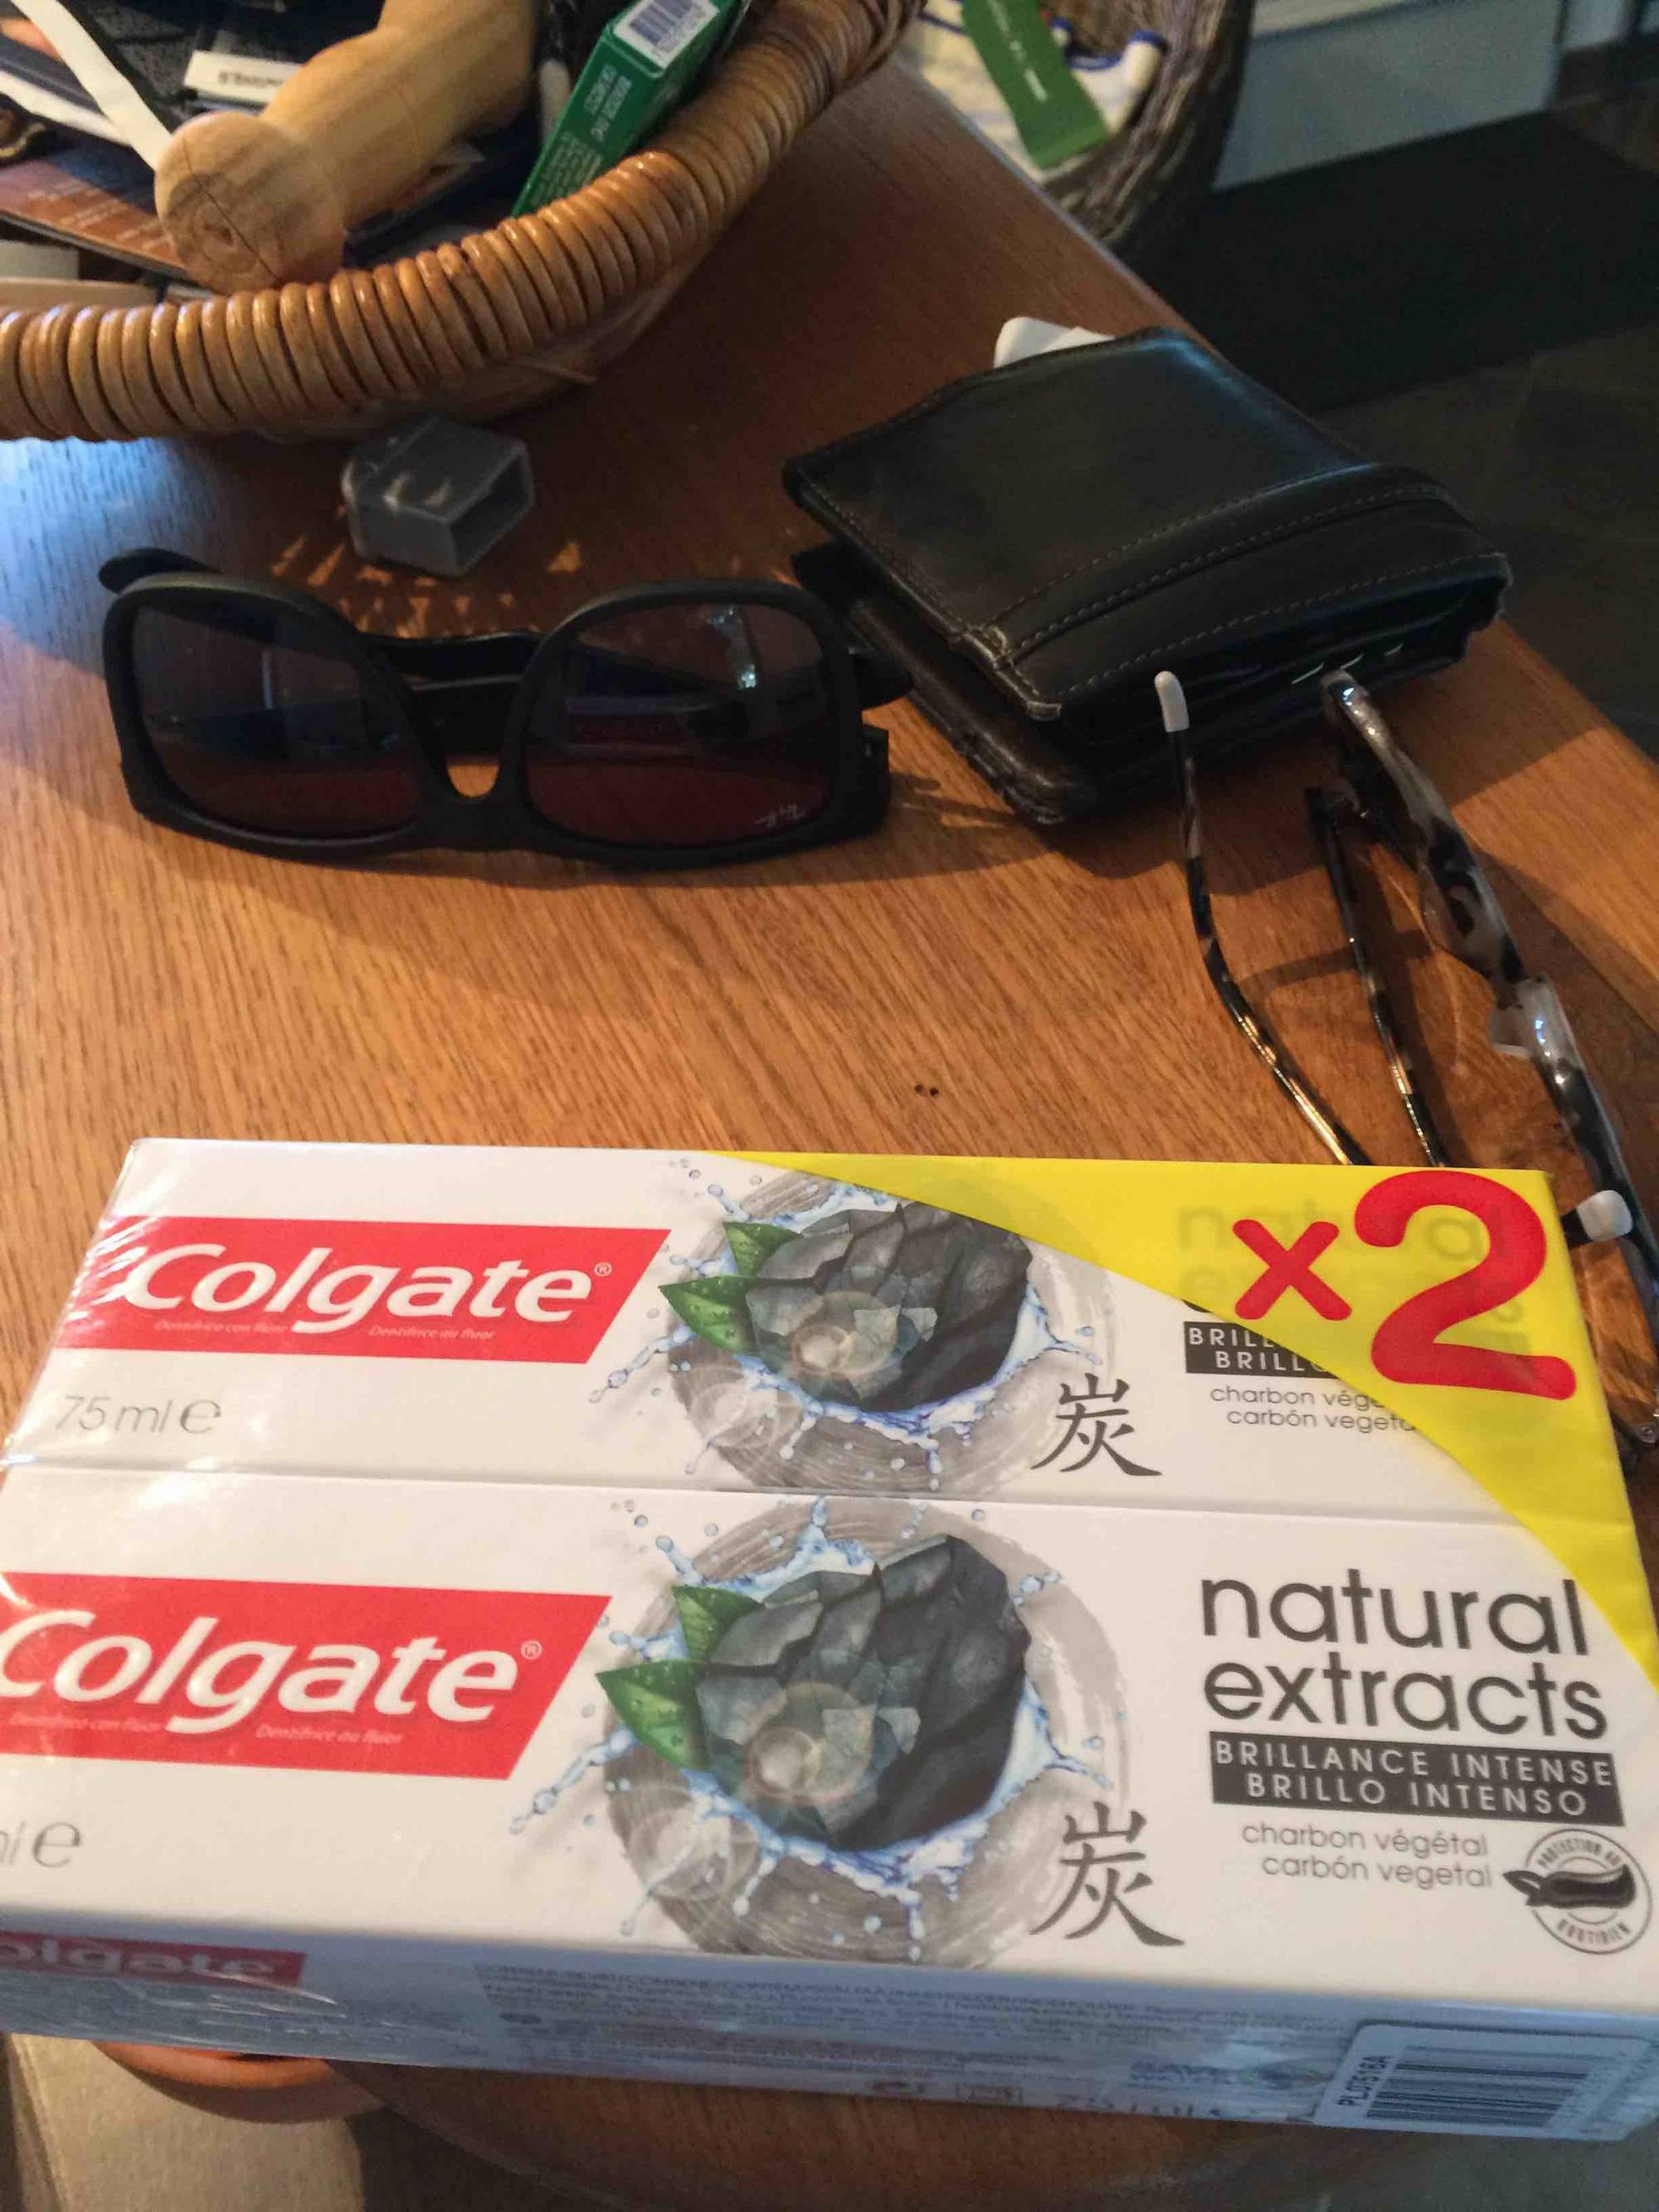 COLGATE - Natural extracts - Brillance intense